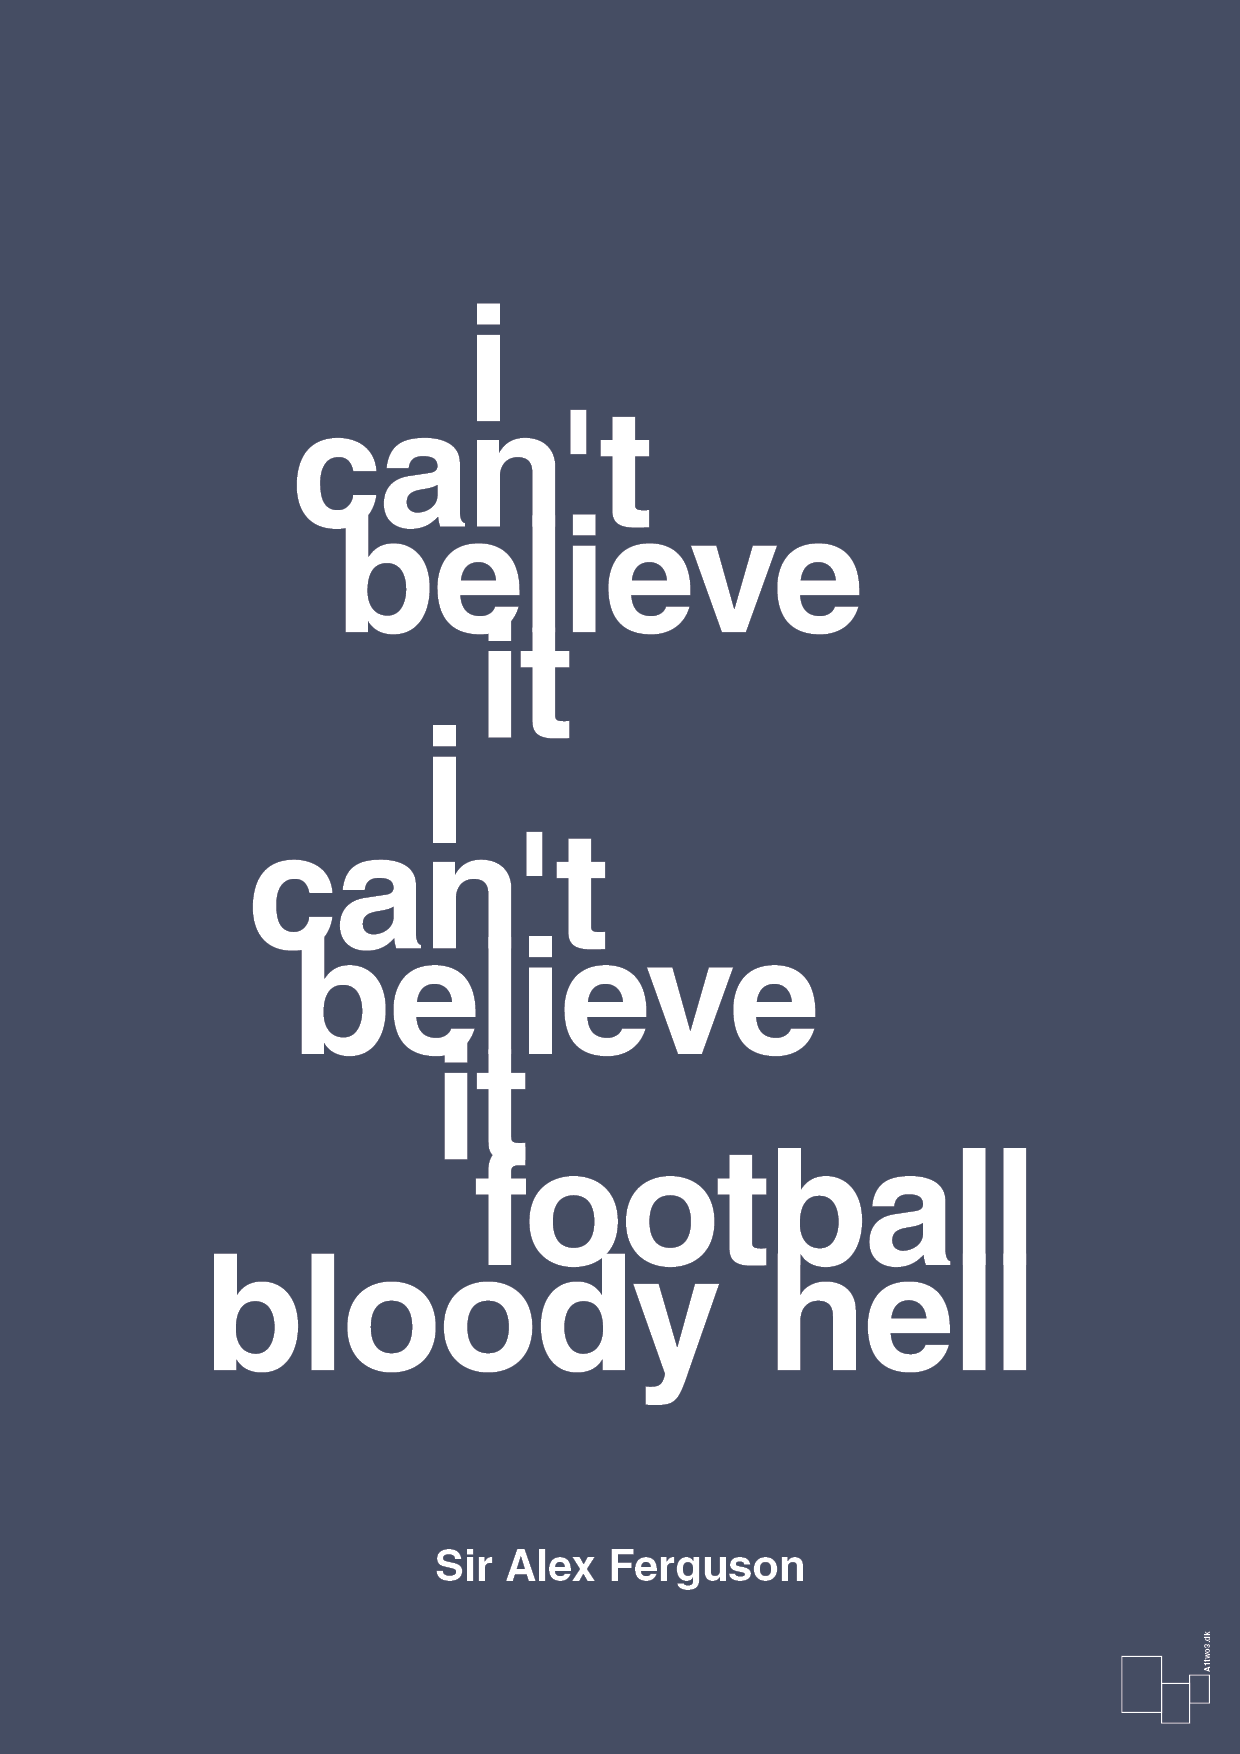 i can't believe it i can't believe it football bloody hell - Plakat med Citater i Petrol